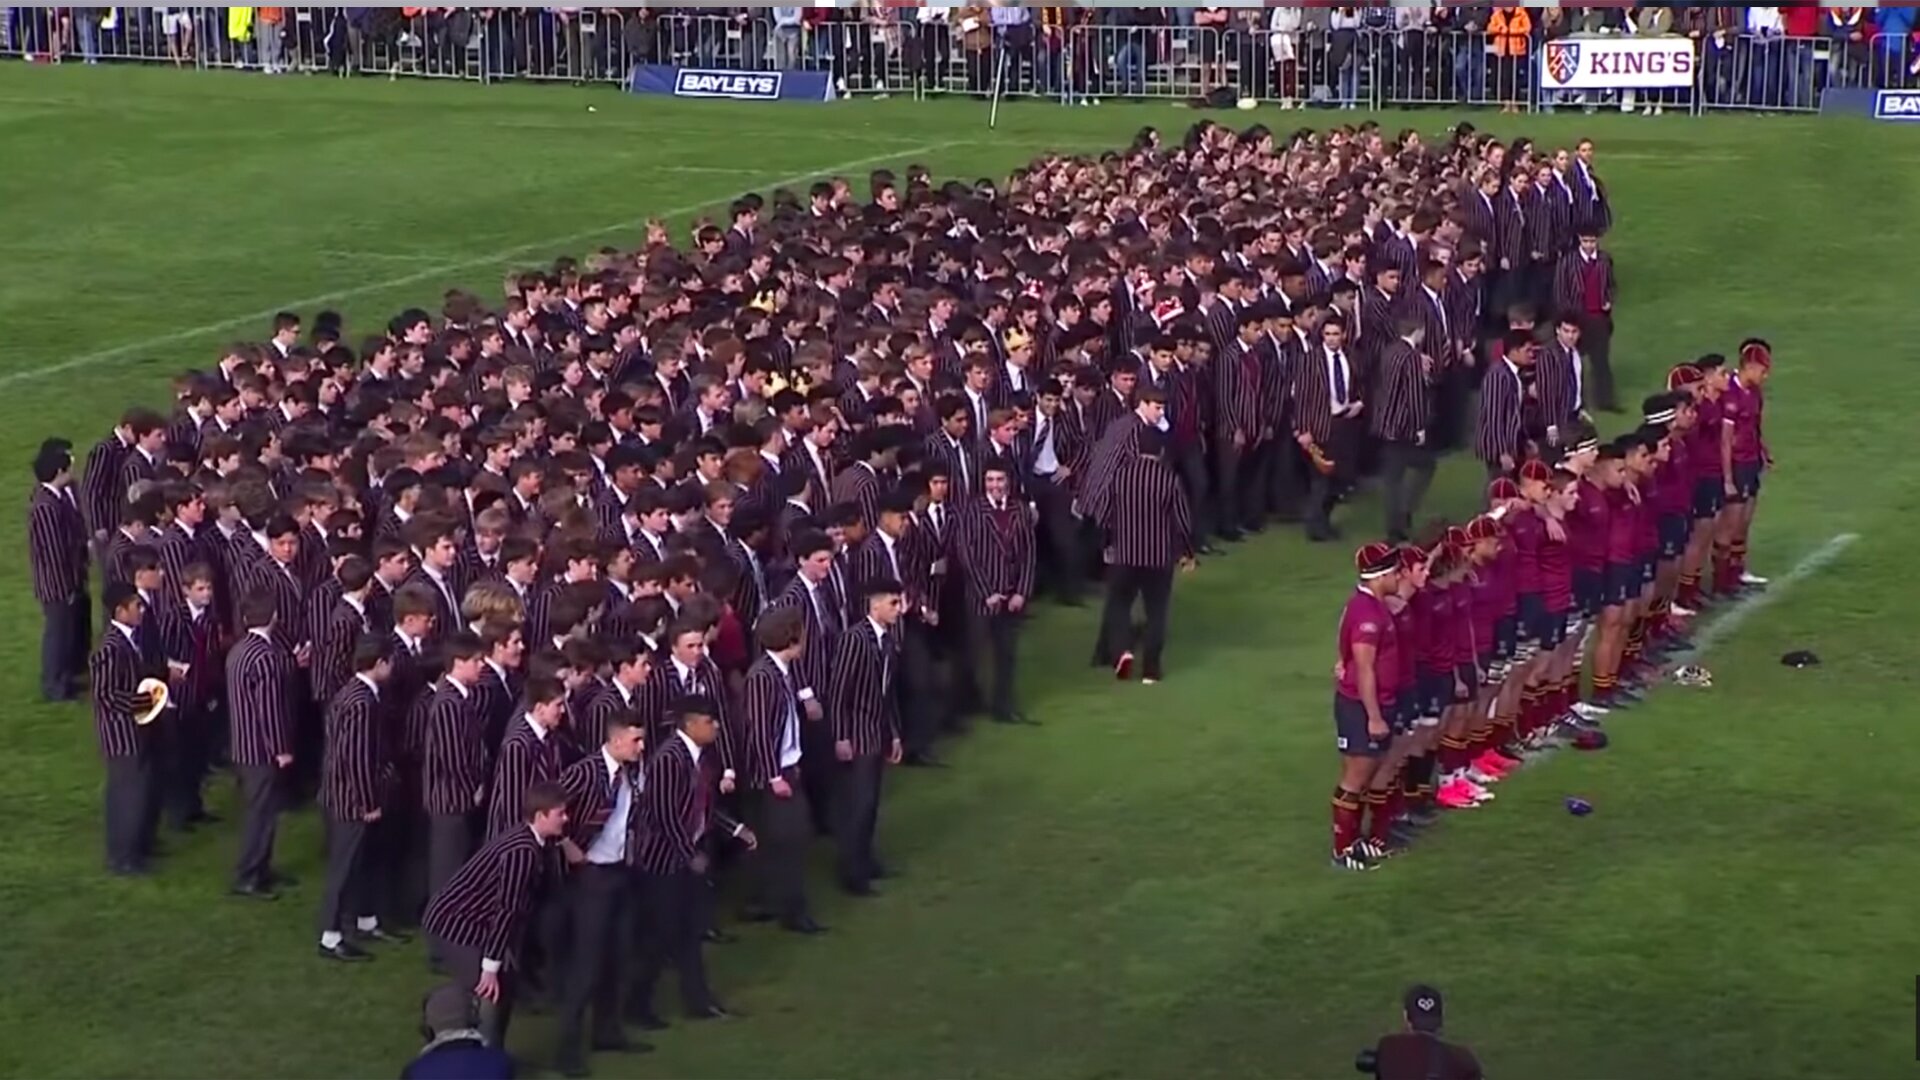 Full footage of the biggest schoolboy grudge match in New Zealand has just been released